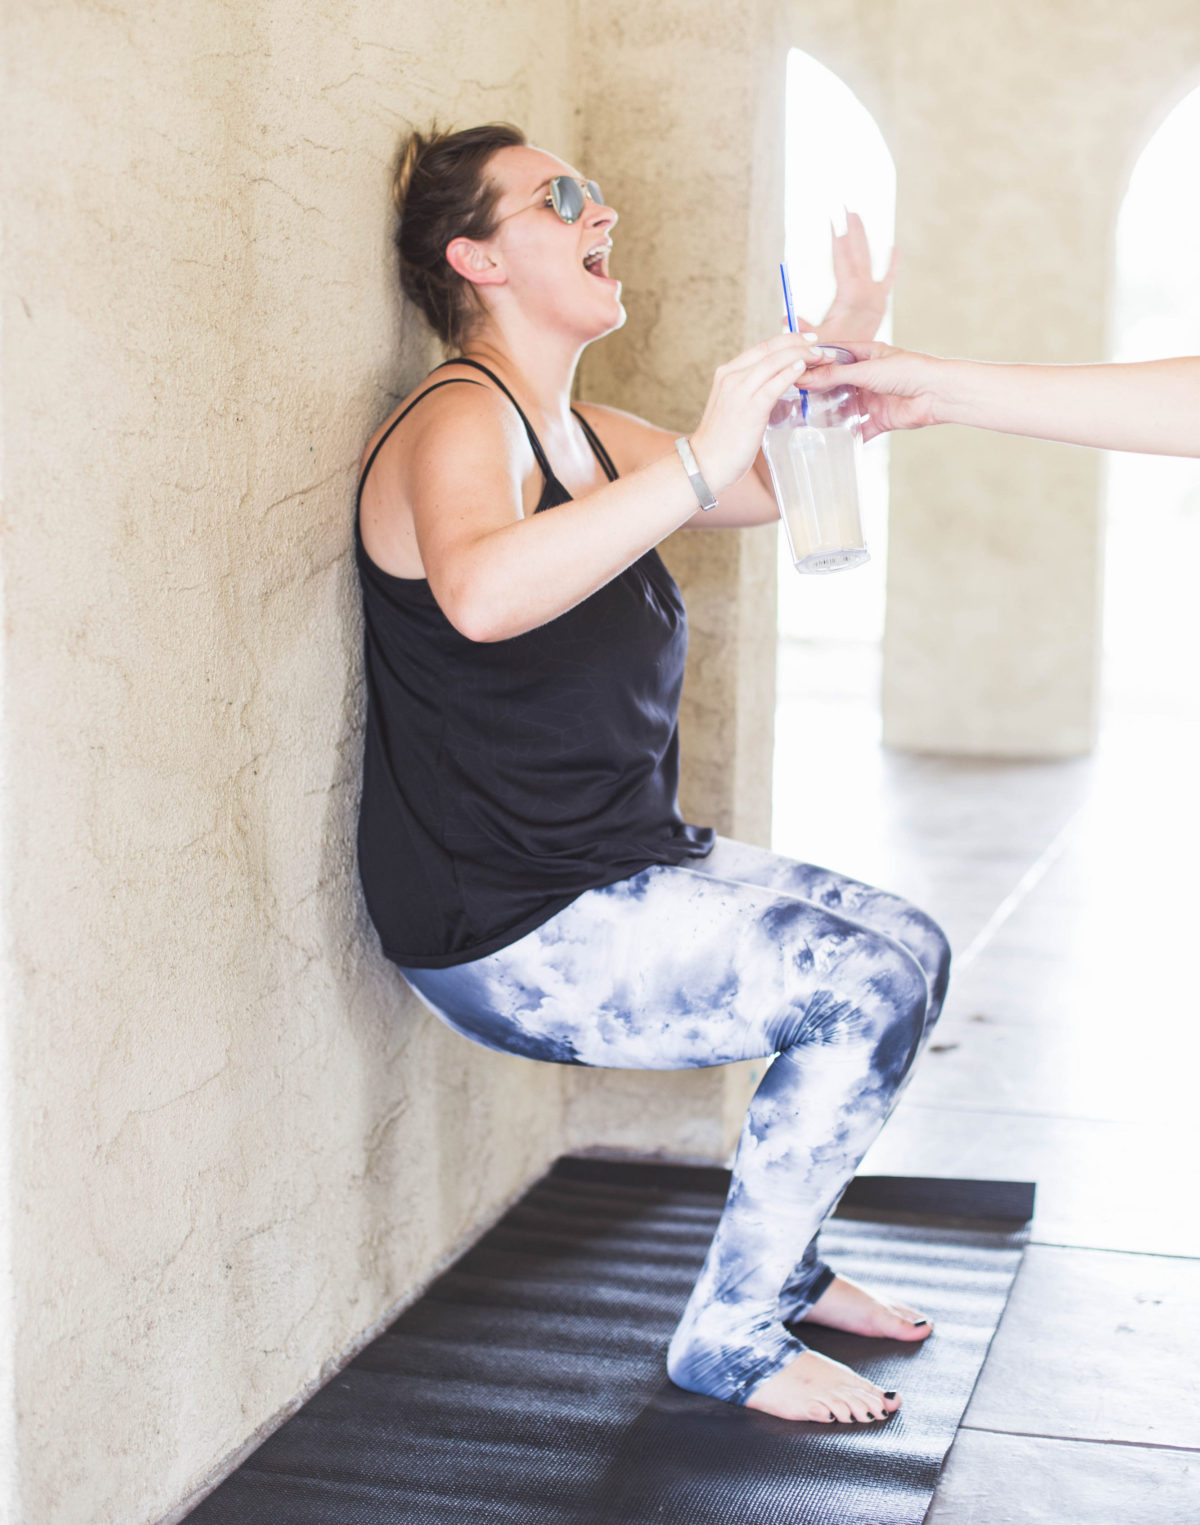 View More: http://madisonkatlinphotography.pass.us/susie-o--workout